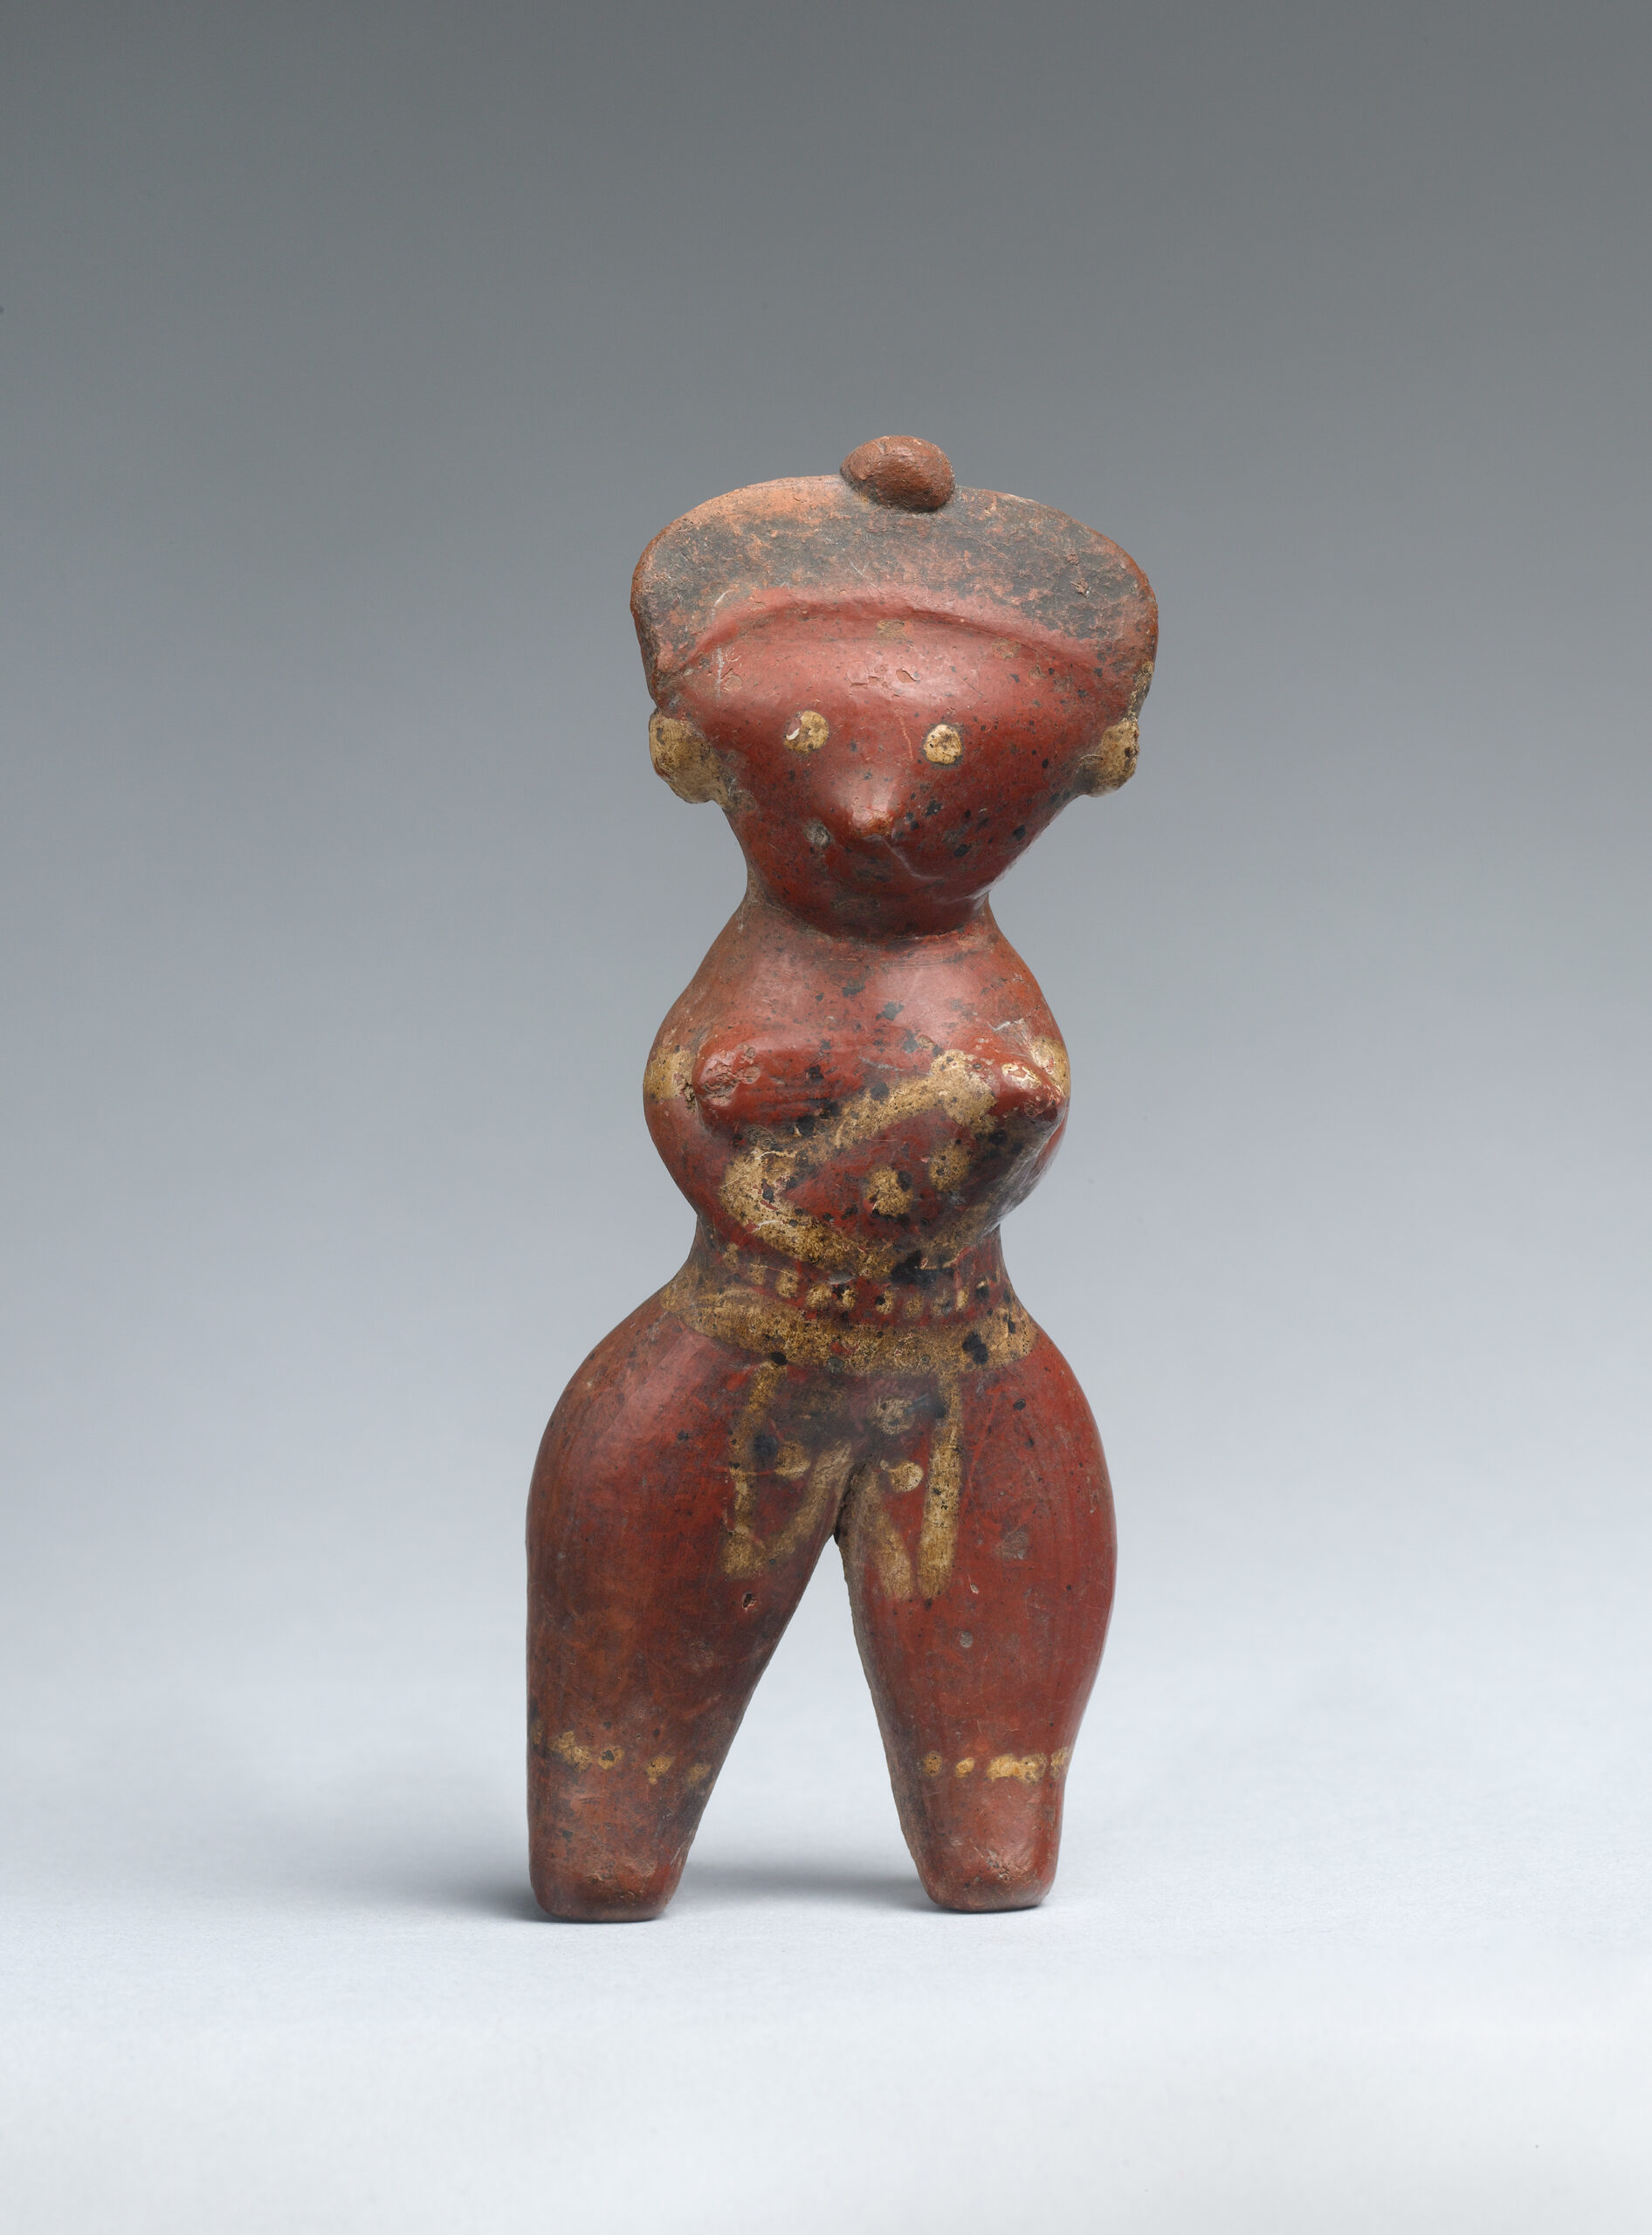 A stylized ceramic standing female figure painted red, yellow, and black.